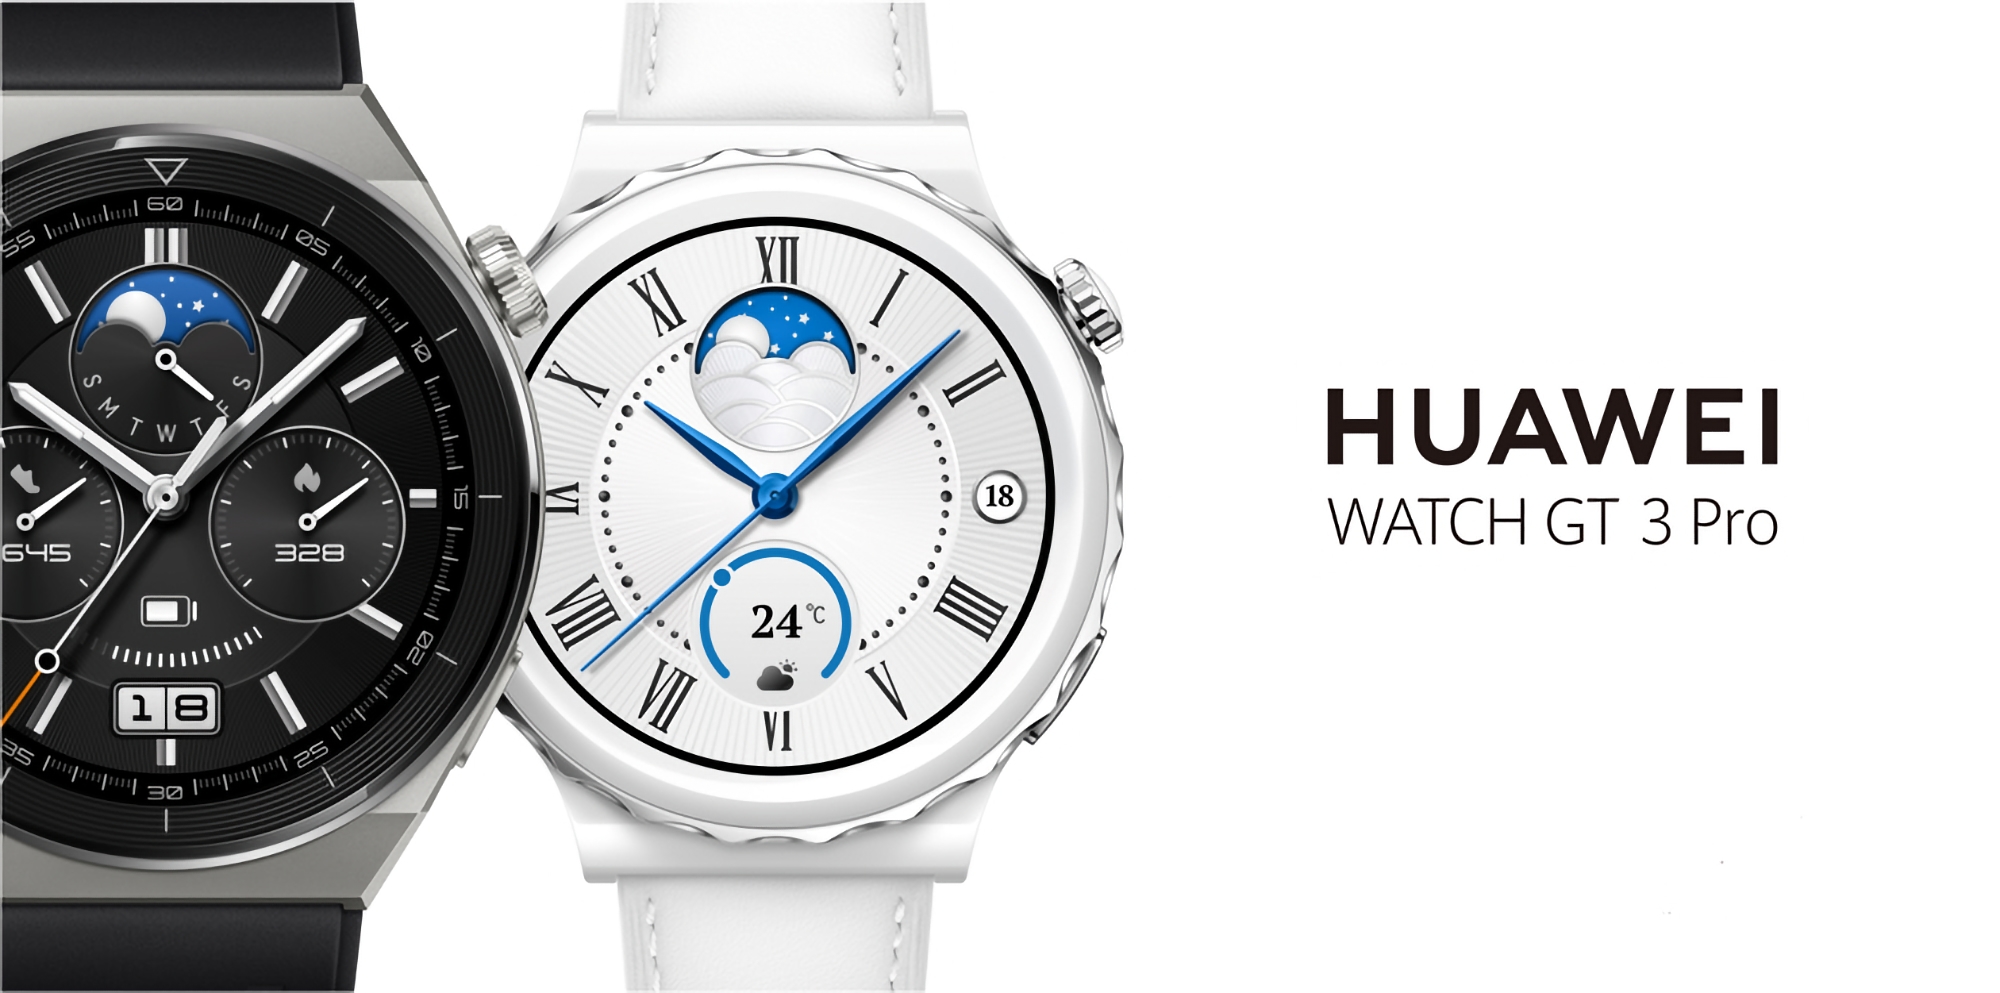 Huawei Watch GT 3 Pro has received a new software version in the global marketplace